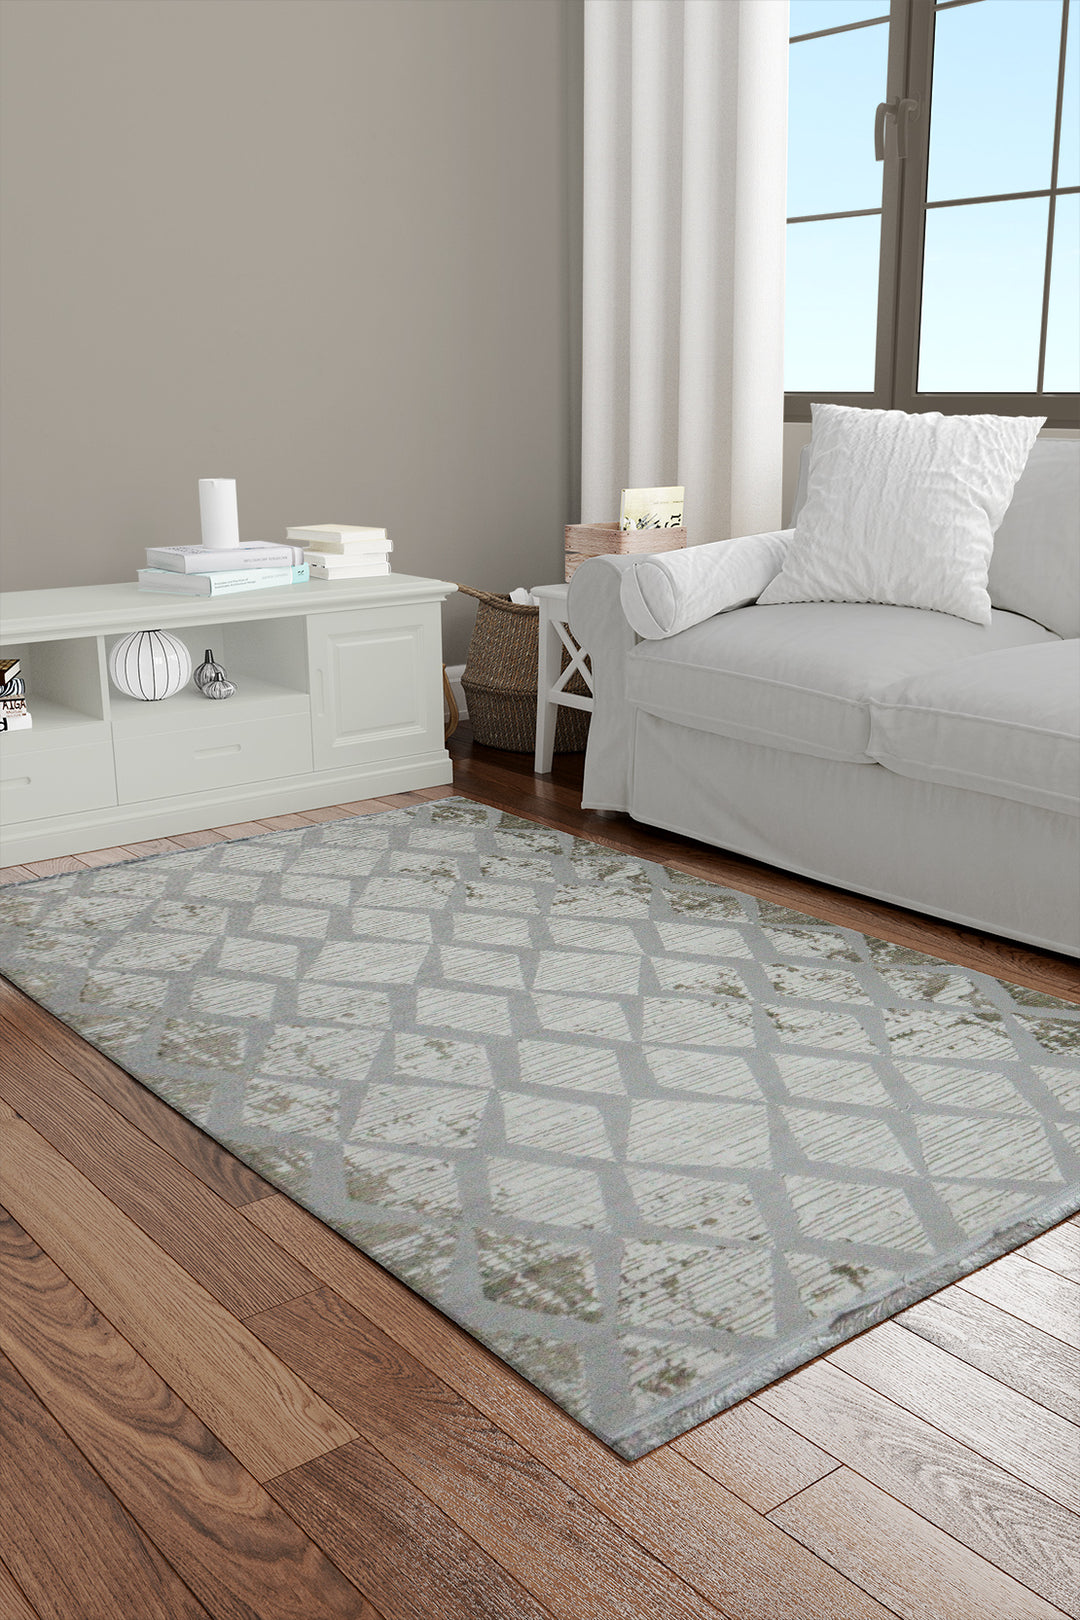 Turkish Modern  Festival 1 Rug - Gray - 3.9 x 5.9 FT - Superior Comfort, Modern Style Accent Rugs